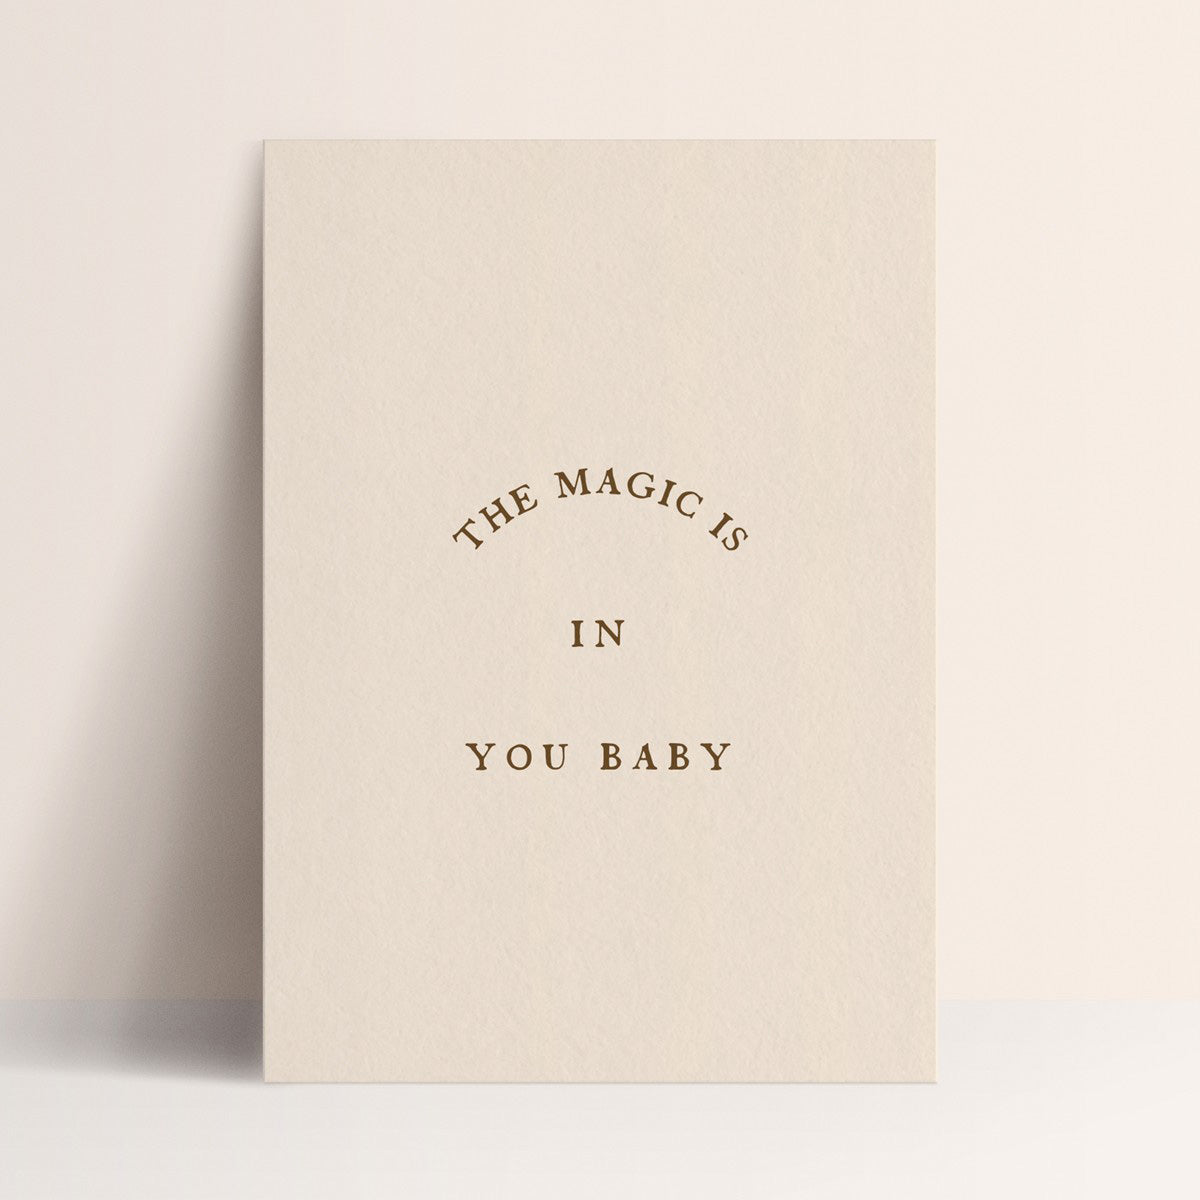 Affiche "The magic is in you baby"